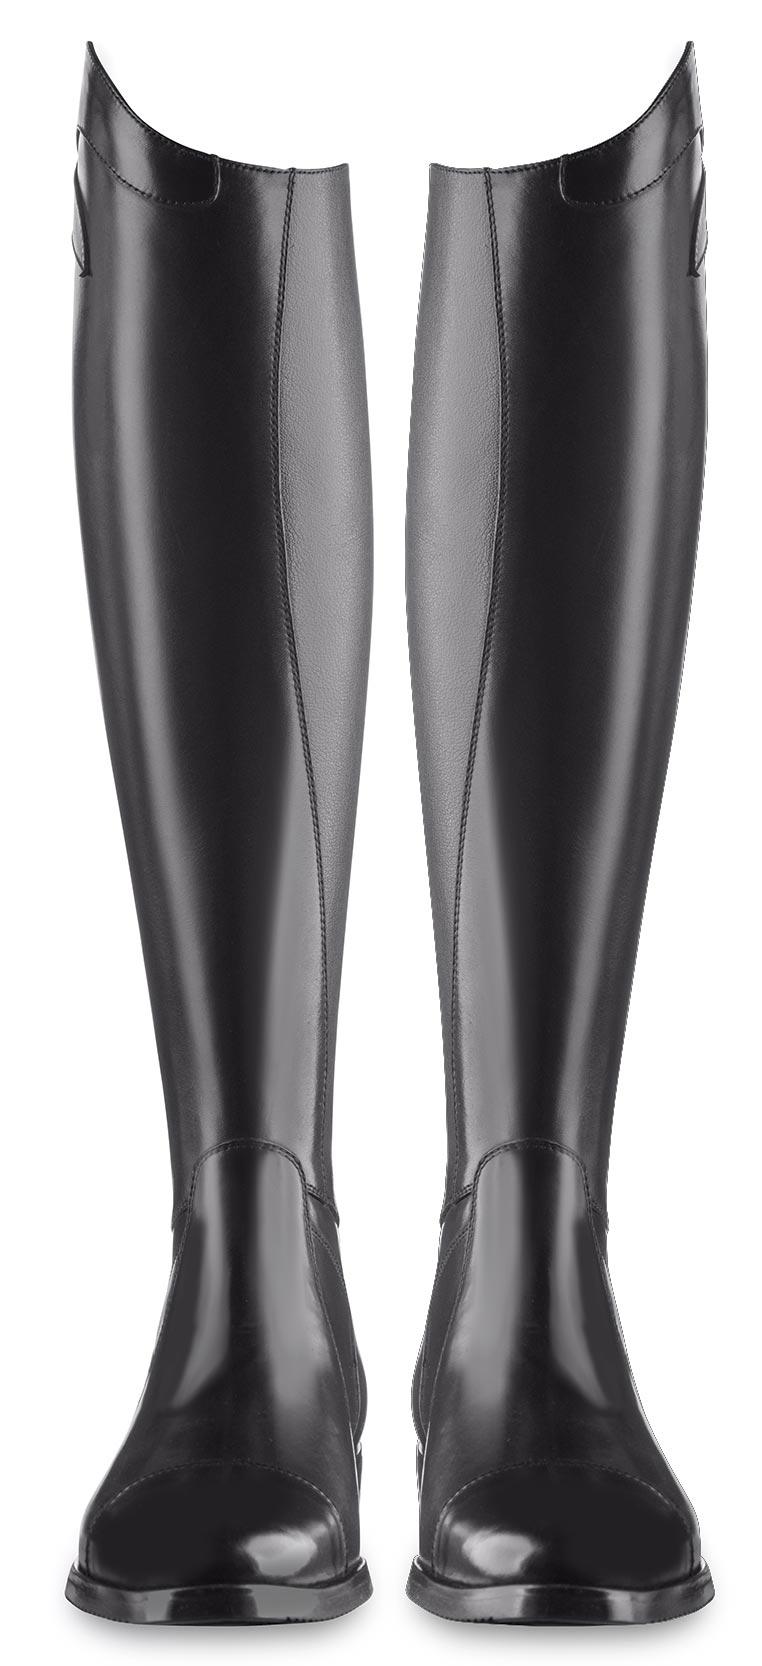 Ego7, Riding Boot, Black Leather, Tall Boot, 